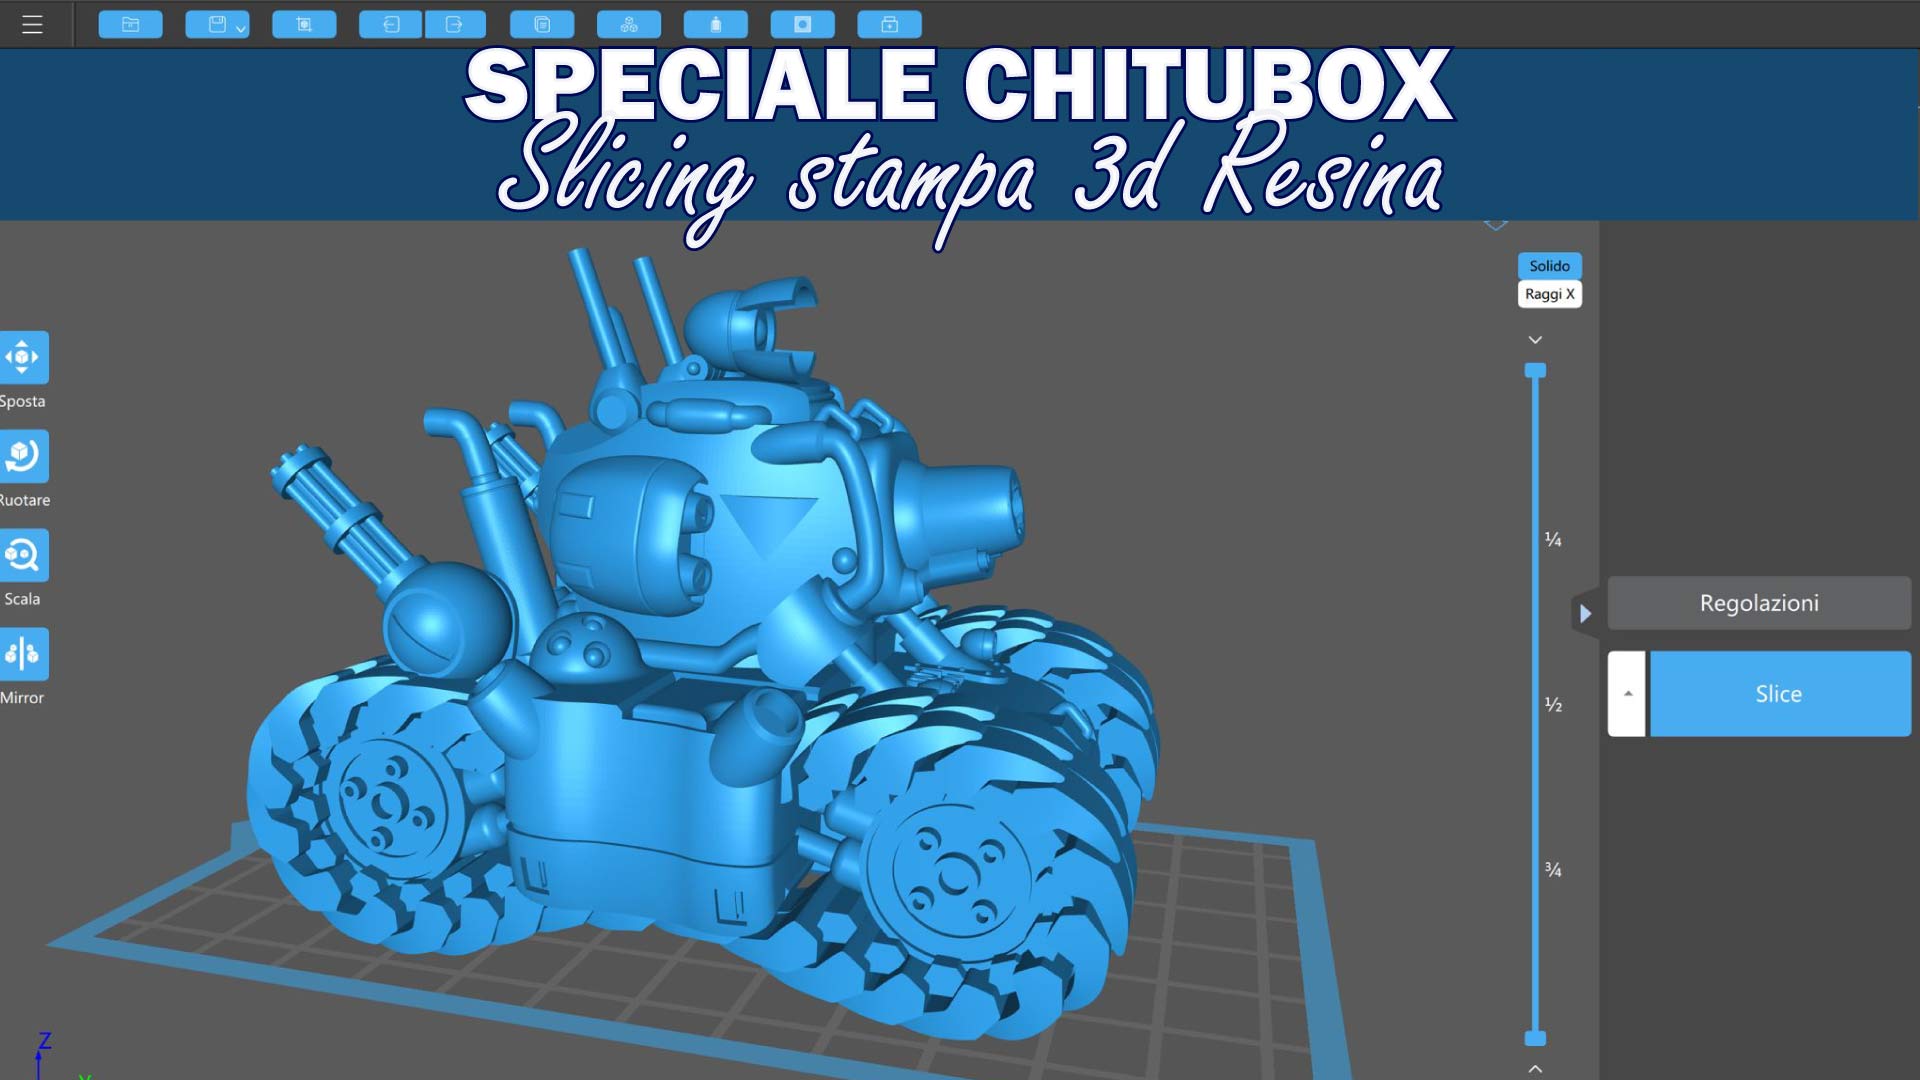 Assistenza in Live - Stampa 3D a Resina con Chitubox